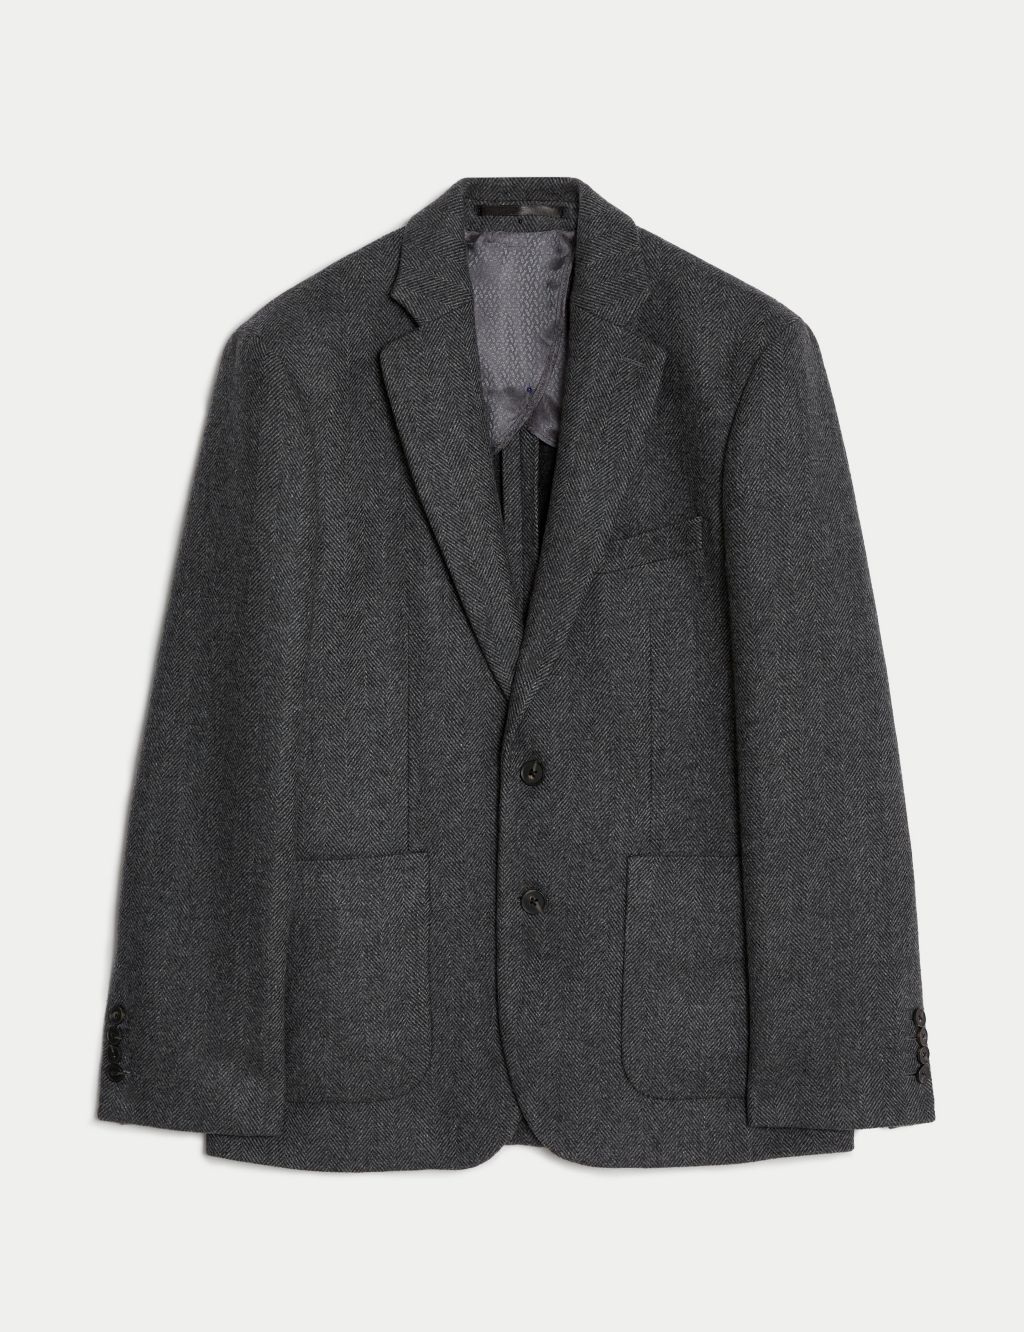 Tailored Fit Wool Rich Suit Jacket image 1